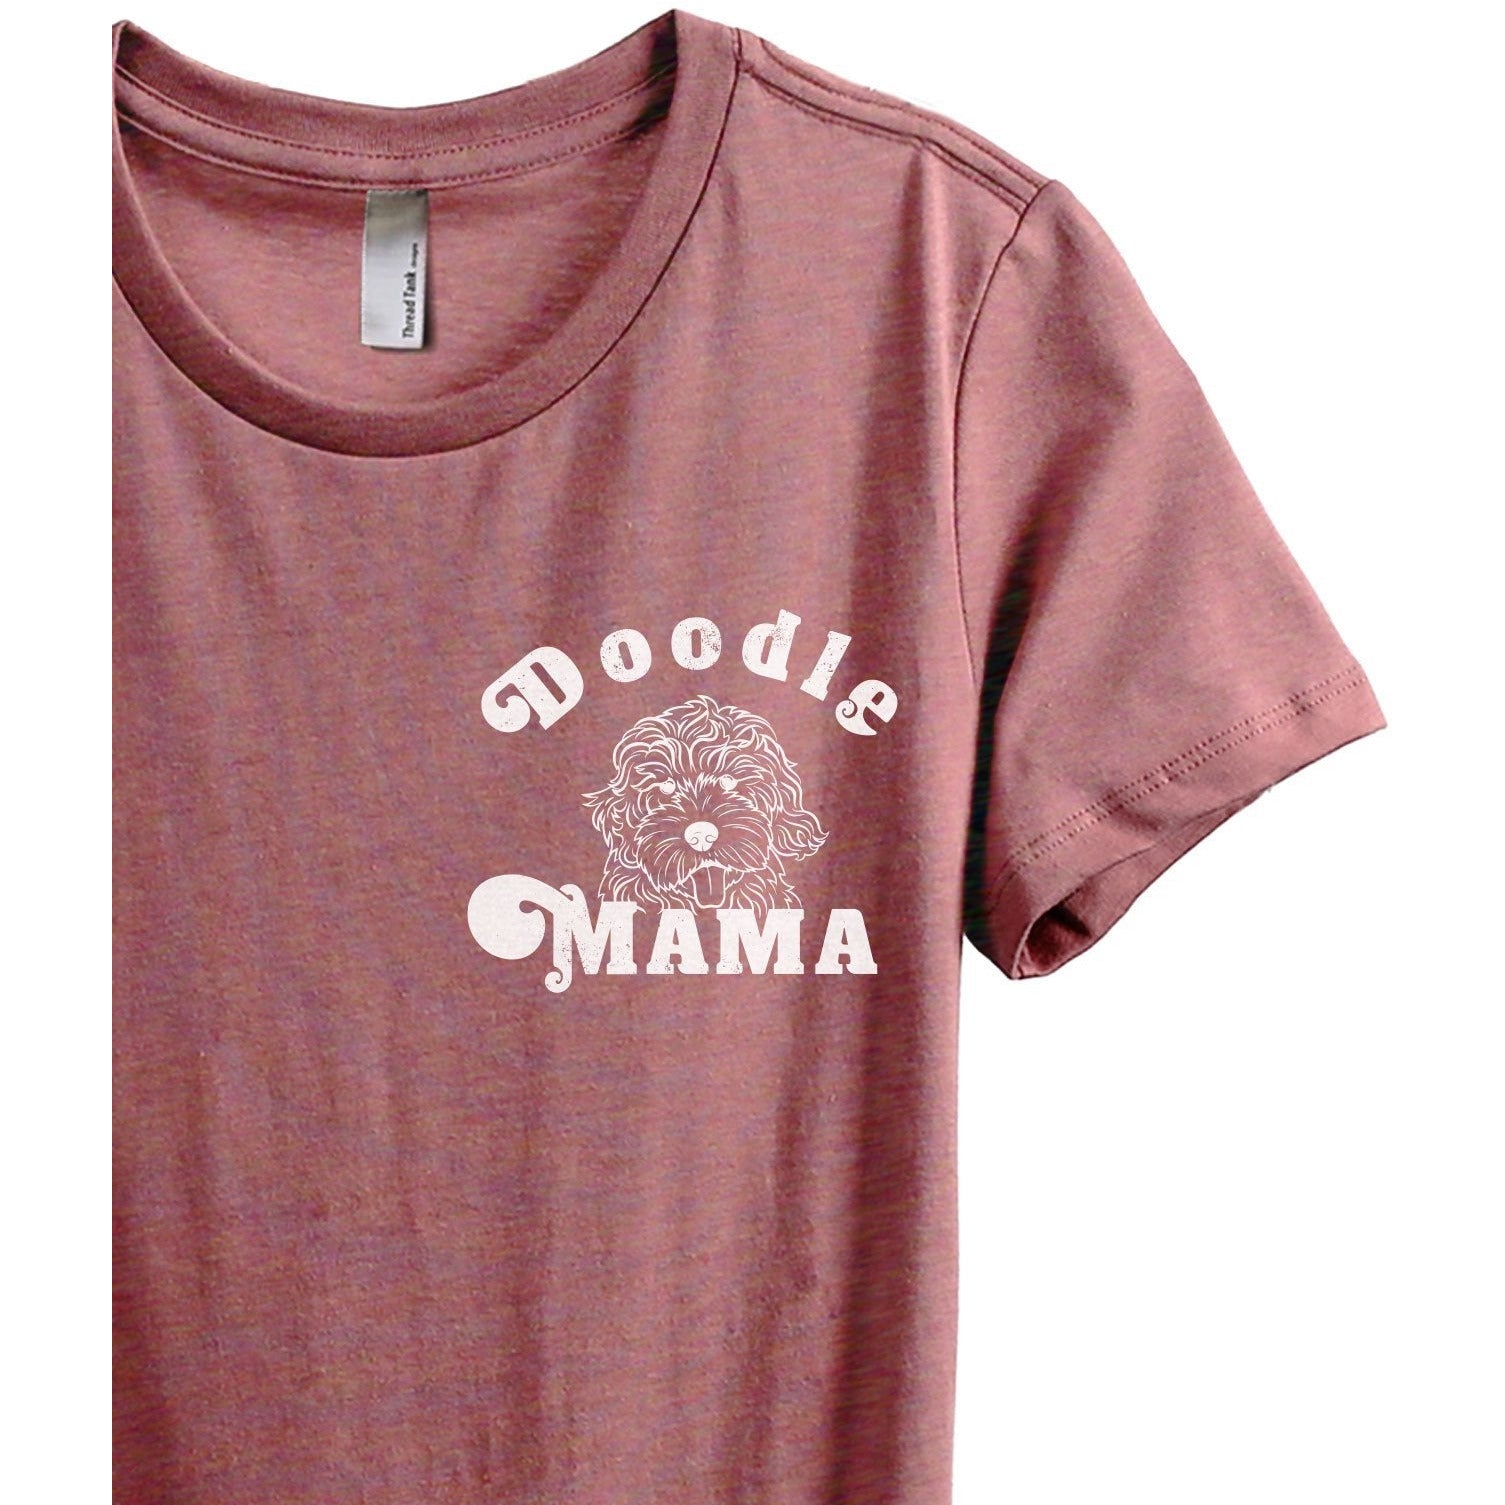 Doodle Mama Women's Relaxed Crewneck T-Shirt Top Tee Heather Rouge Zoom Details
